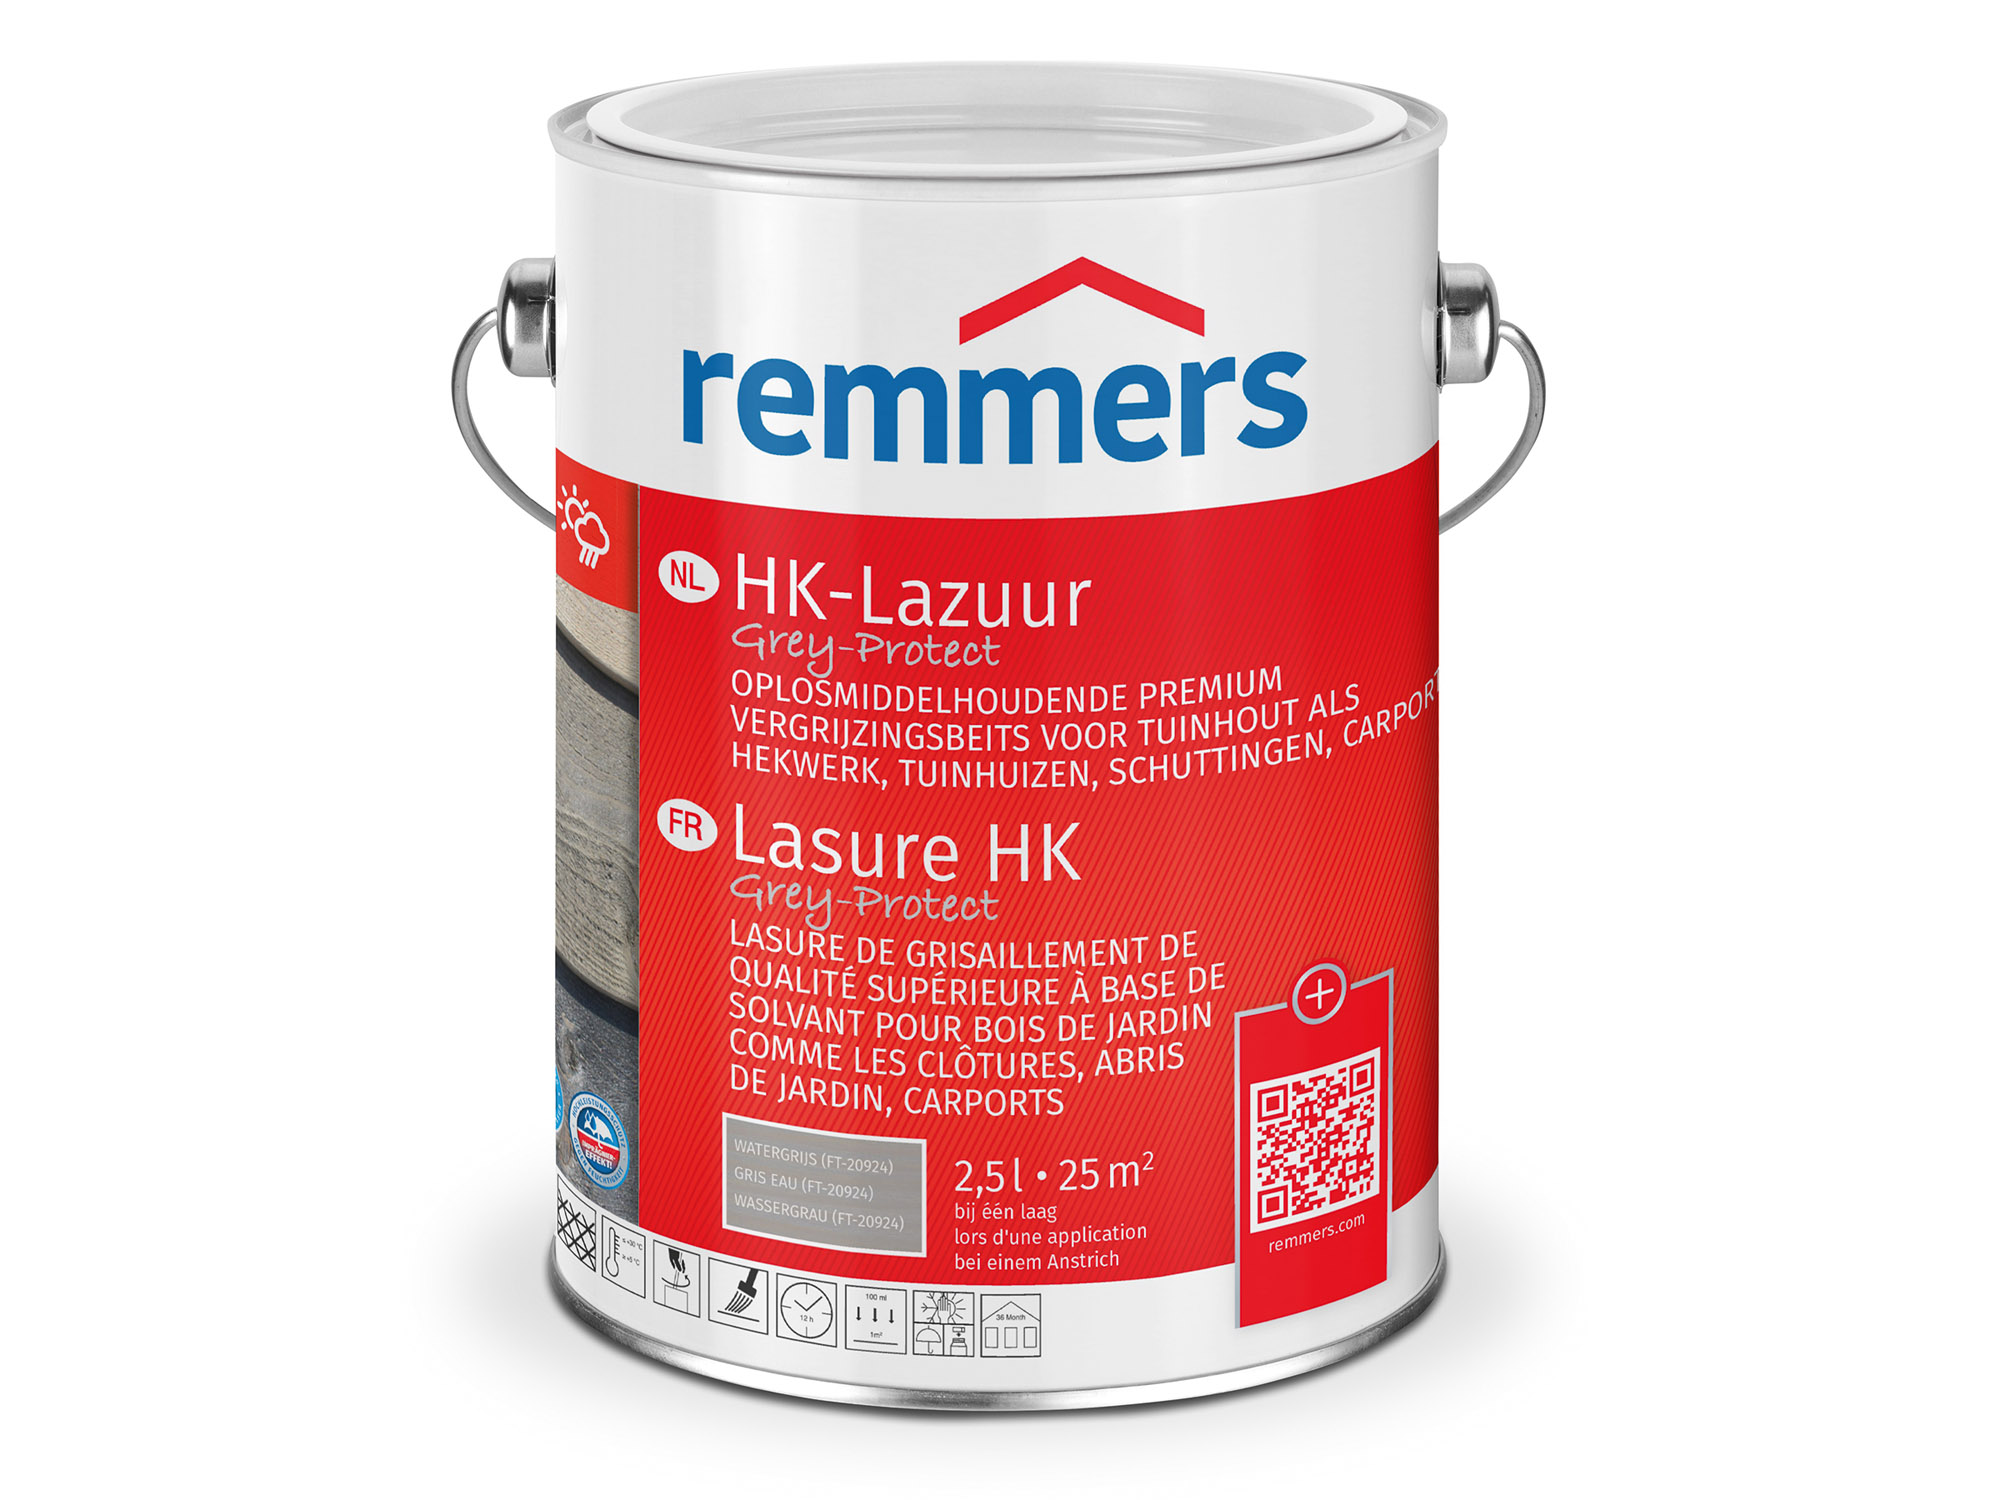 Remmers HK-Lazuur Grey Protect watergrijs